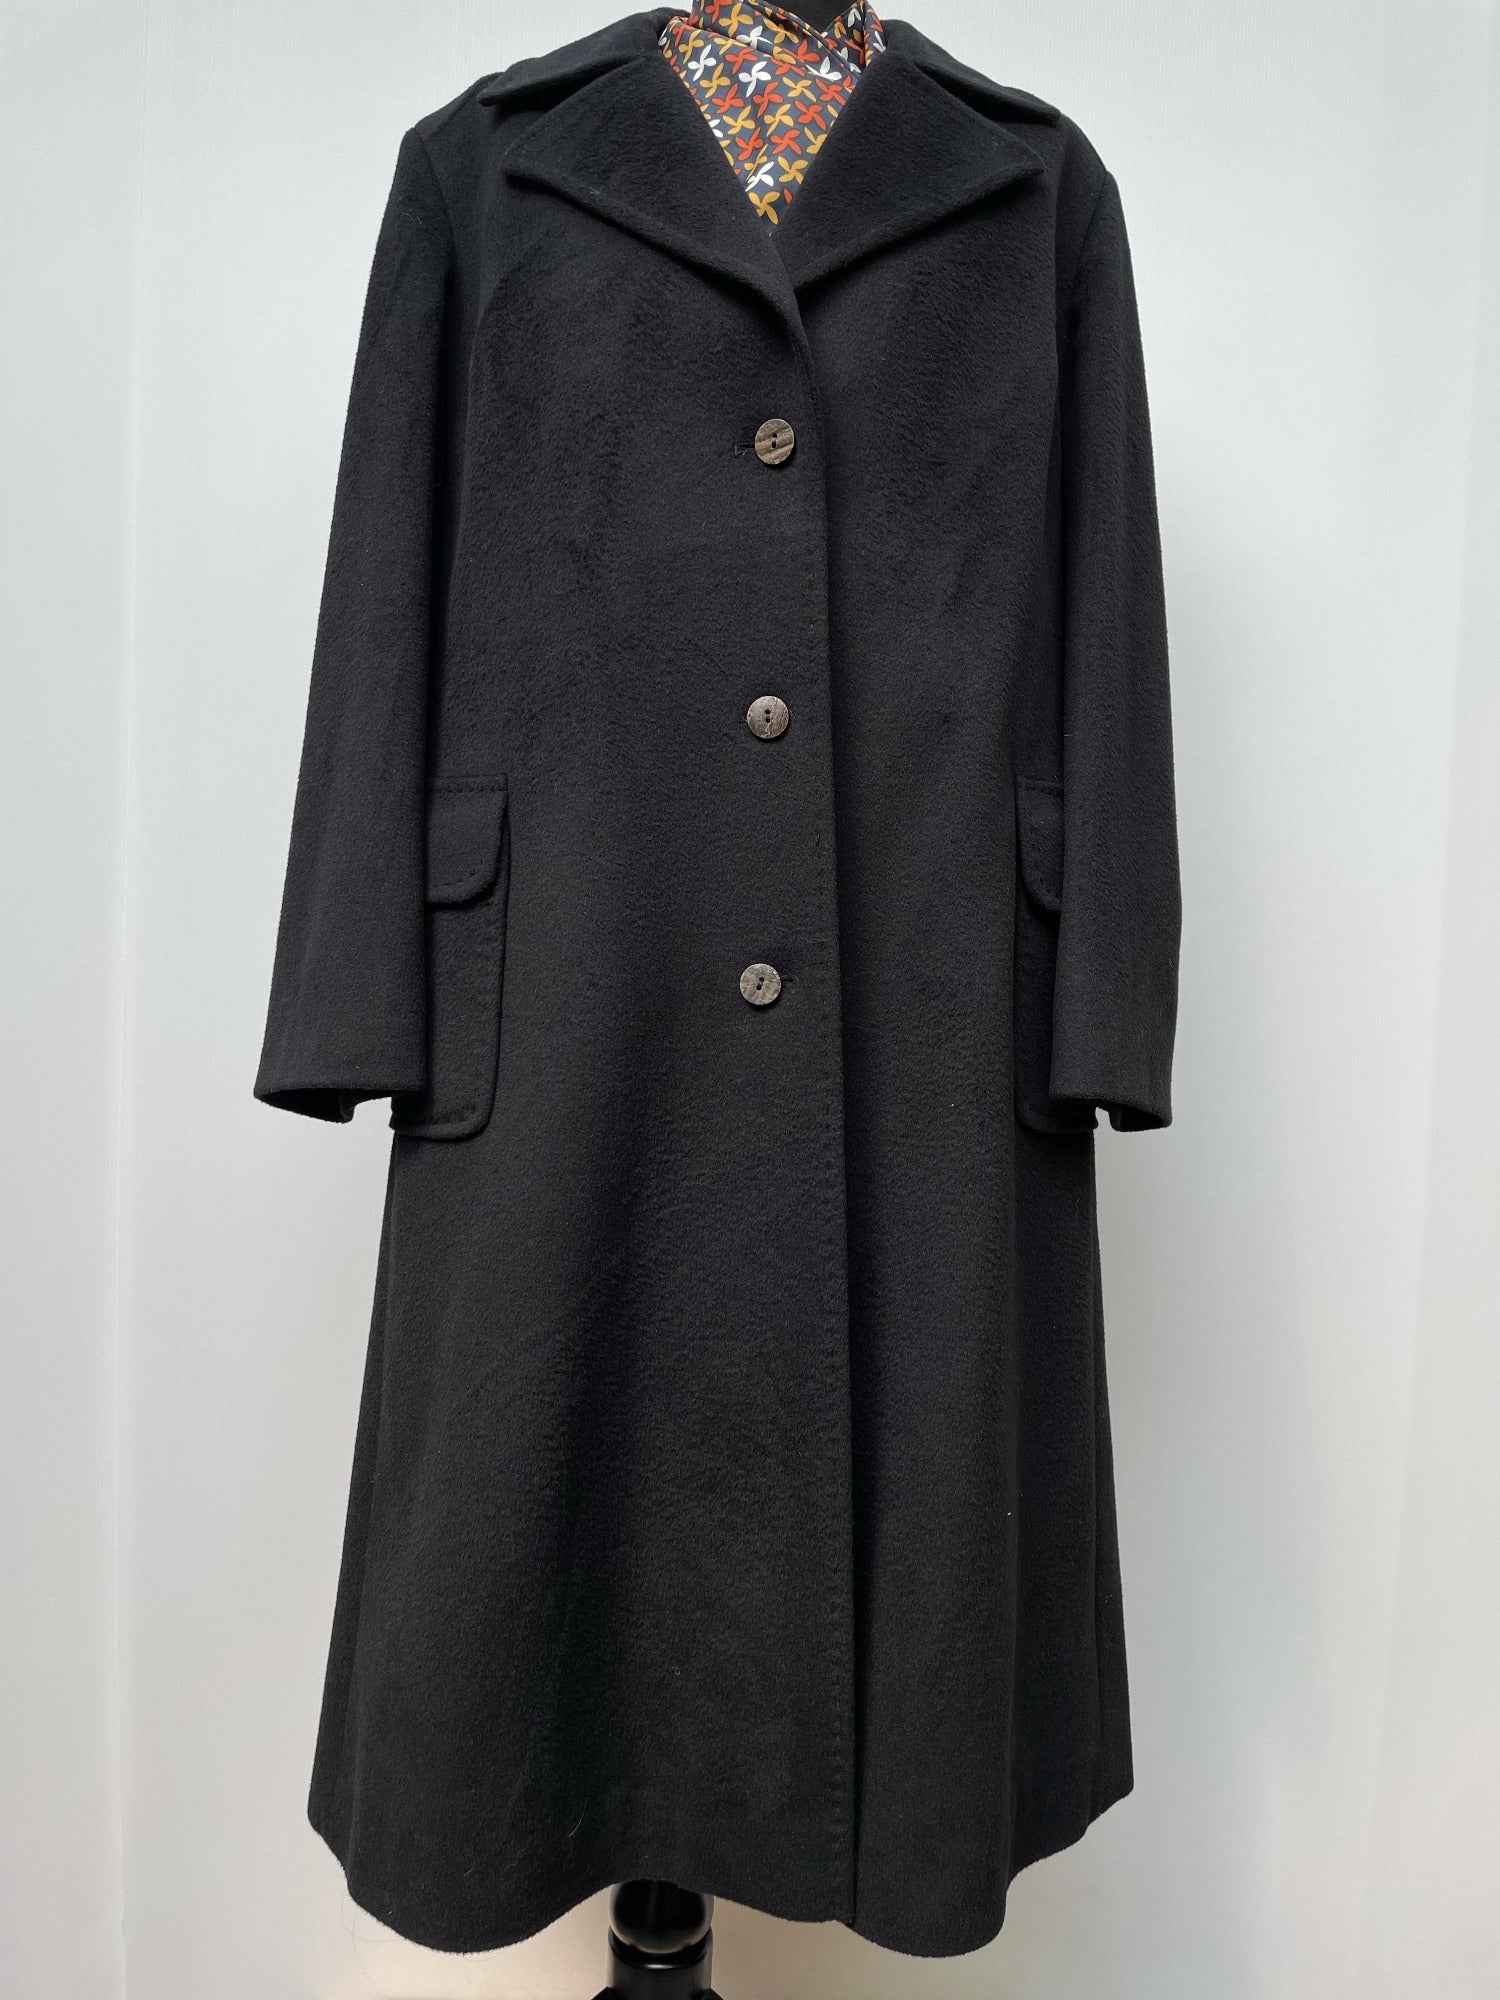 wool coat  Wool Blend  womens  wetherall  vintage  Urban Village Vintage  urban village  red  pure wool  pockets  made in england  long sleeves  long sleeve  long length coat  long length  long coat  lapels  Jacket  button down  black  70s  1970s  16